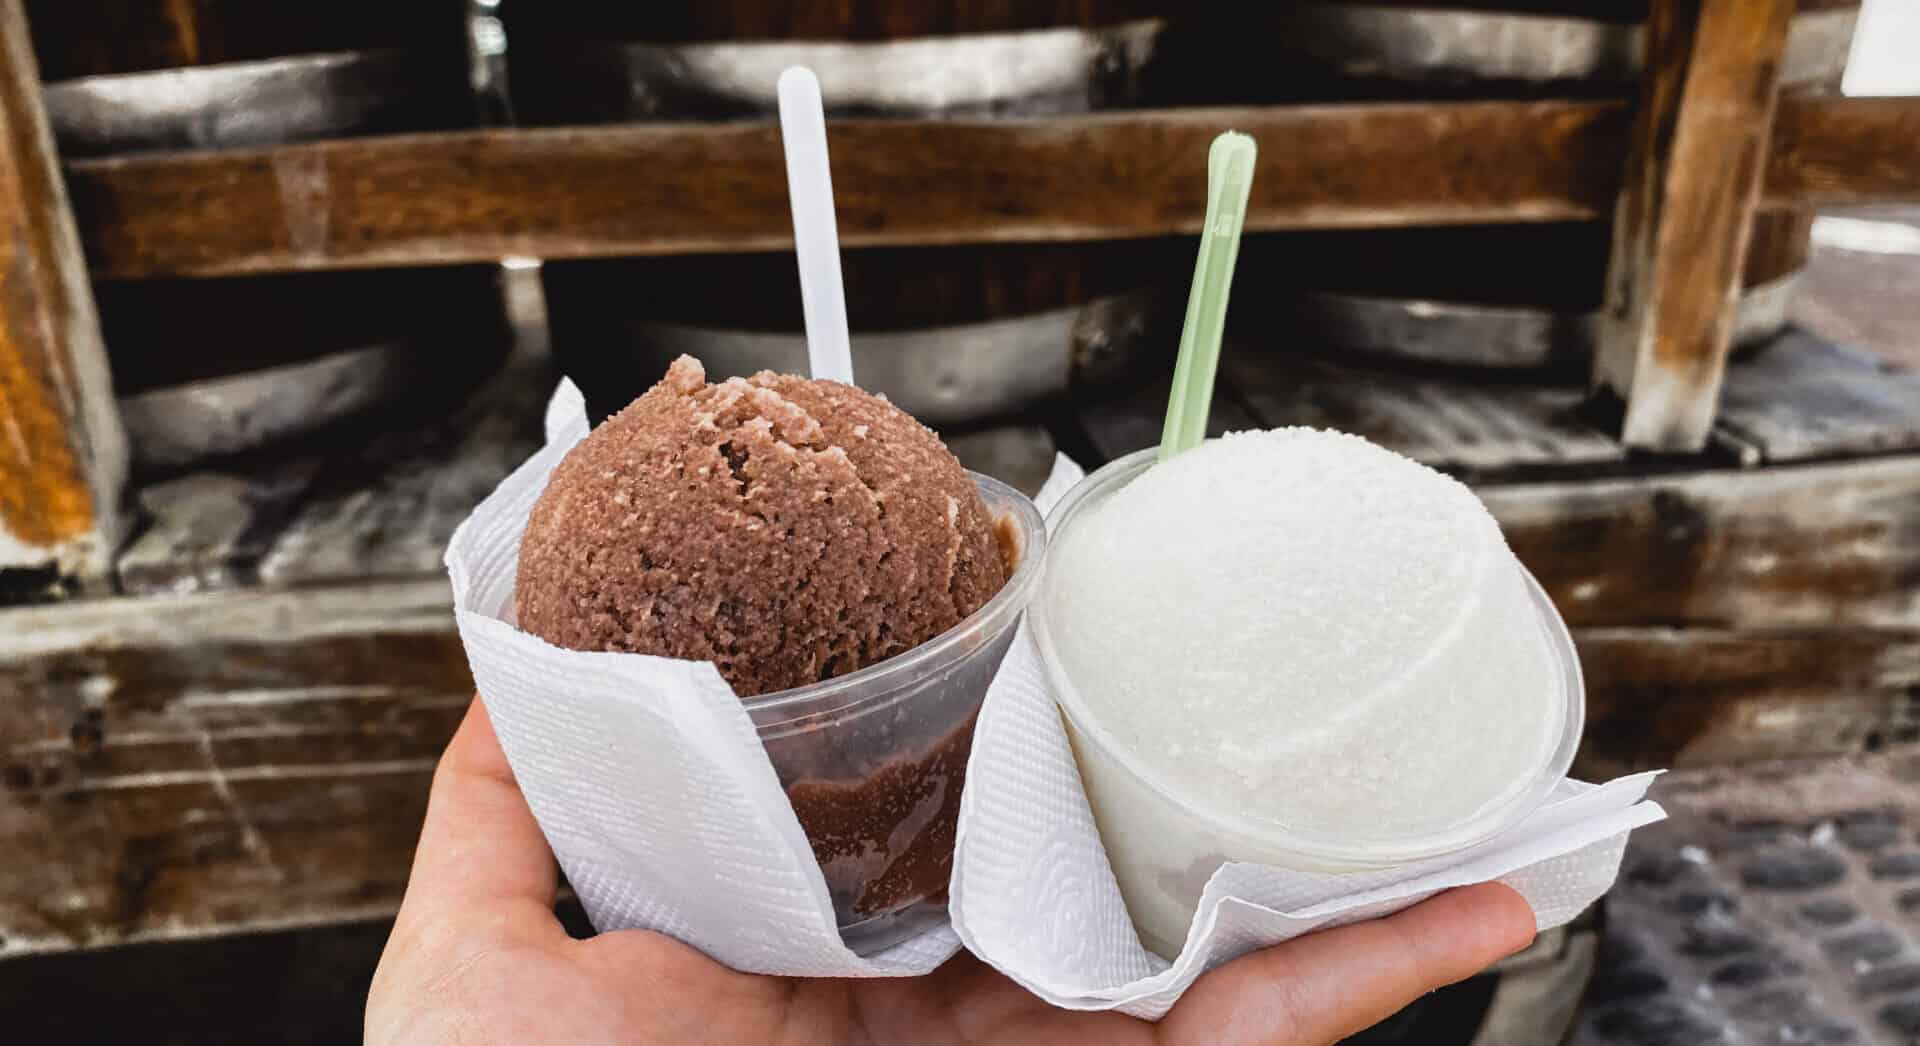 Chocolate and Tequila flavored ice cream in Jalisco, Mexico